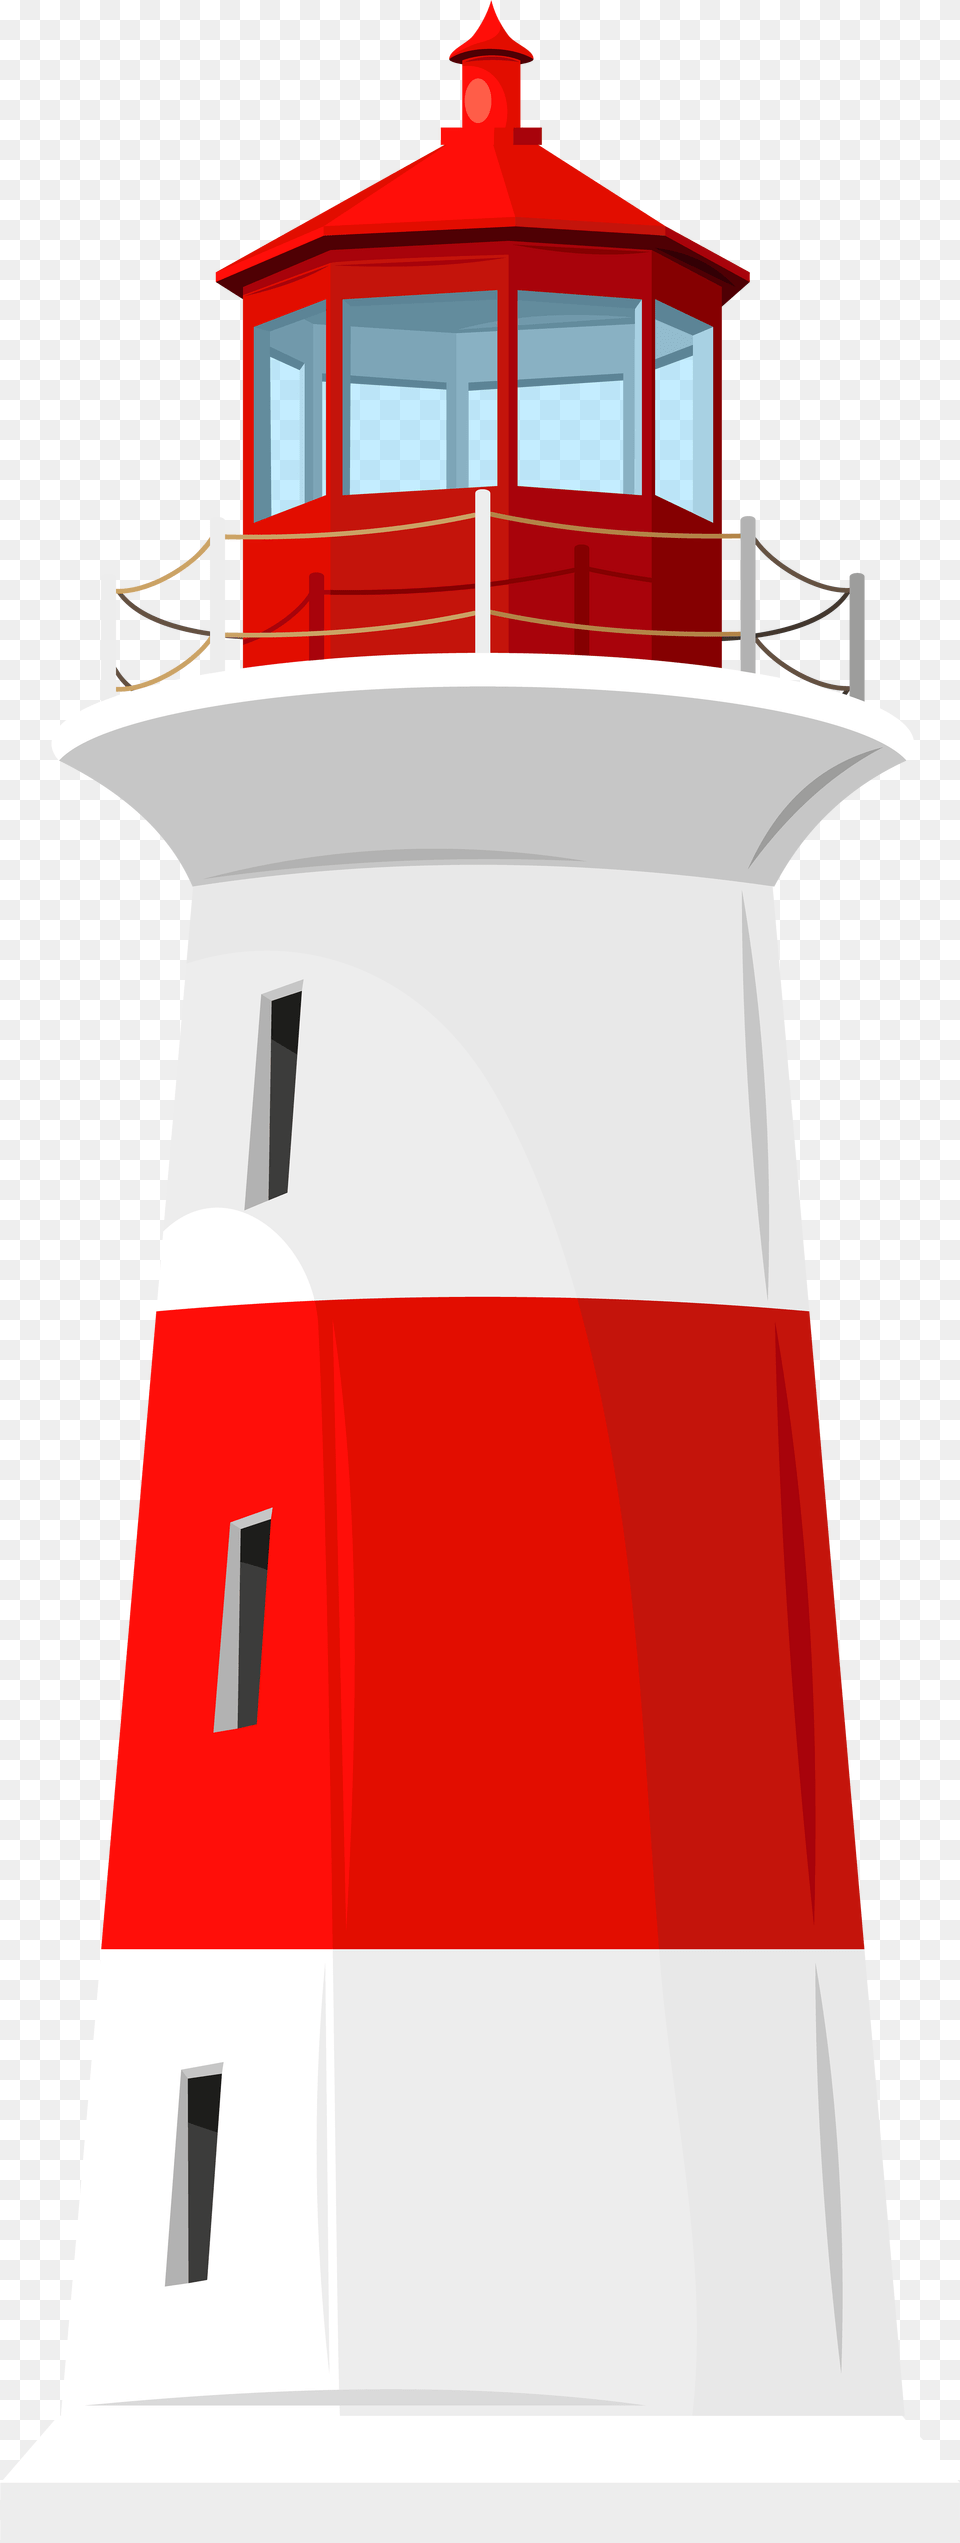 Collection Of Lighthouse Clipart Cartoon Lighthouse, Architecture, Building, Tower, Beacon Free Transparent Png